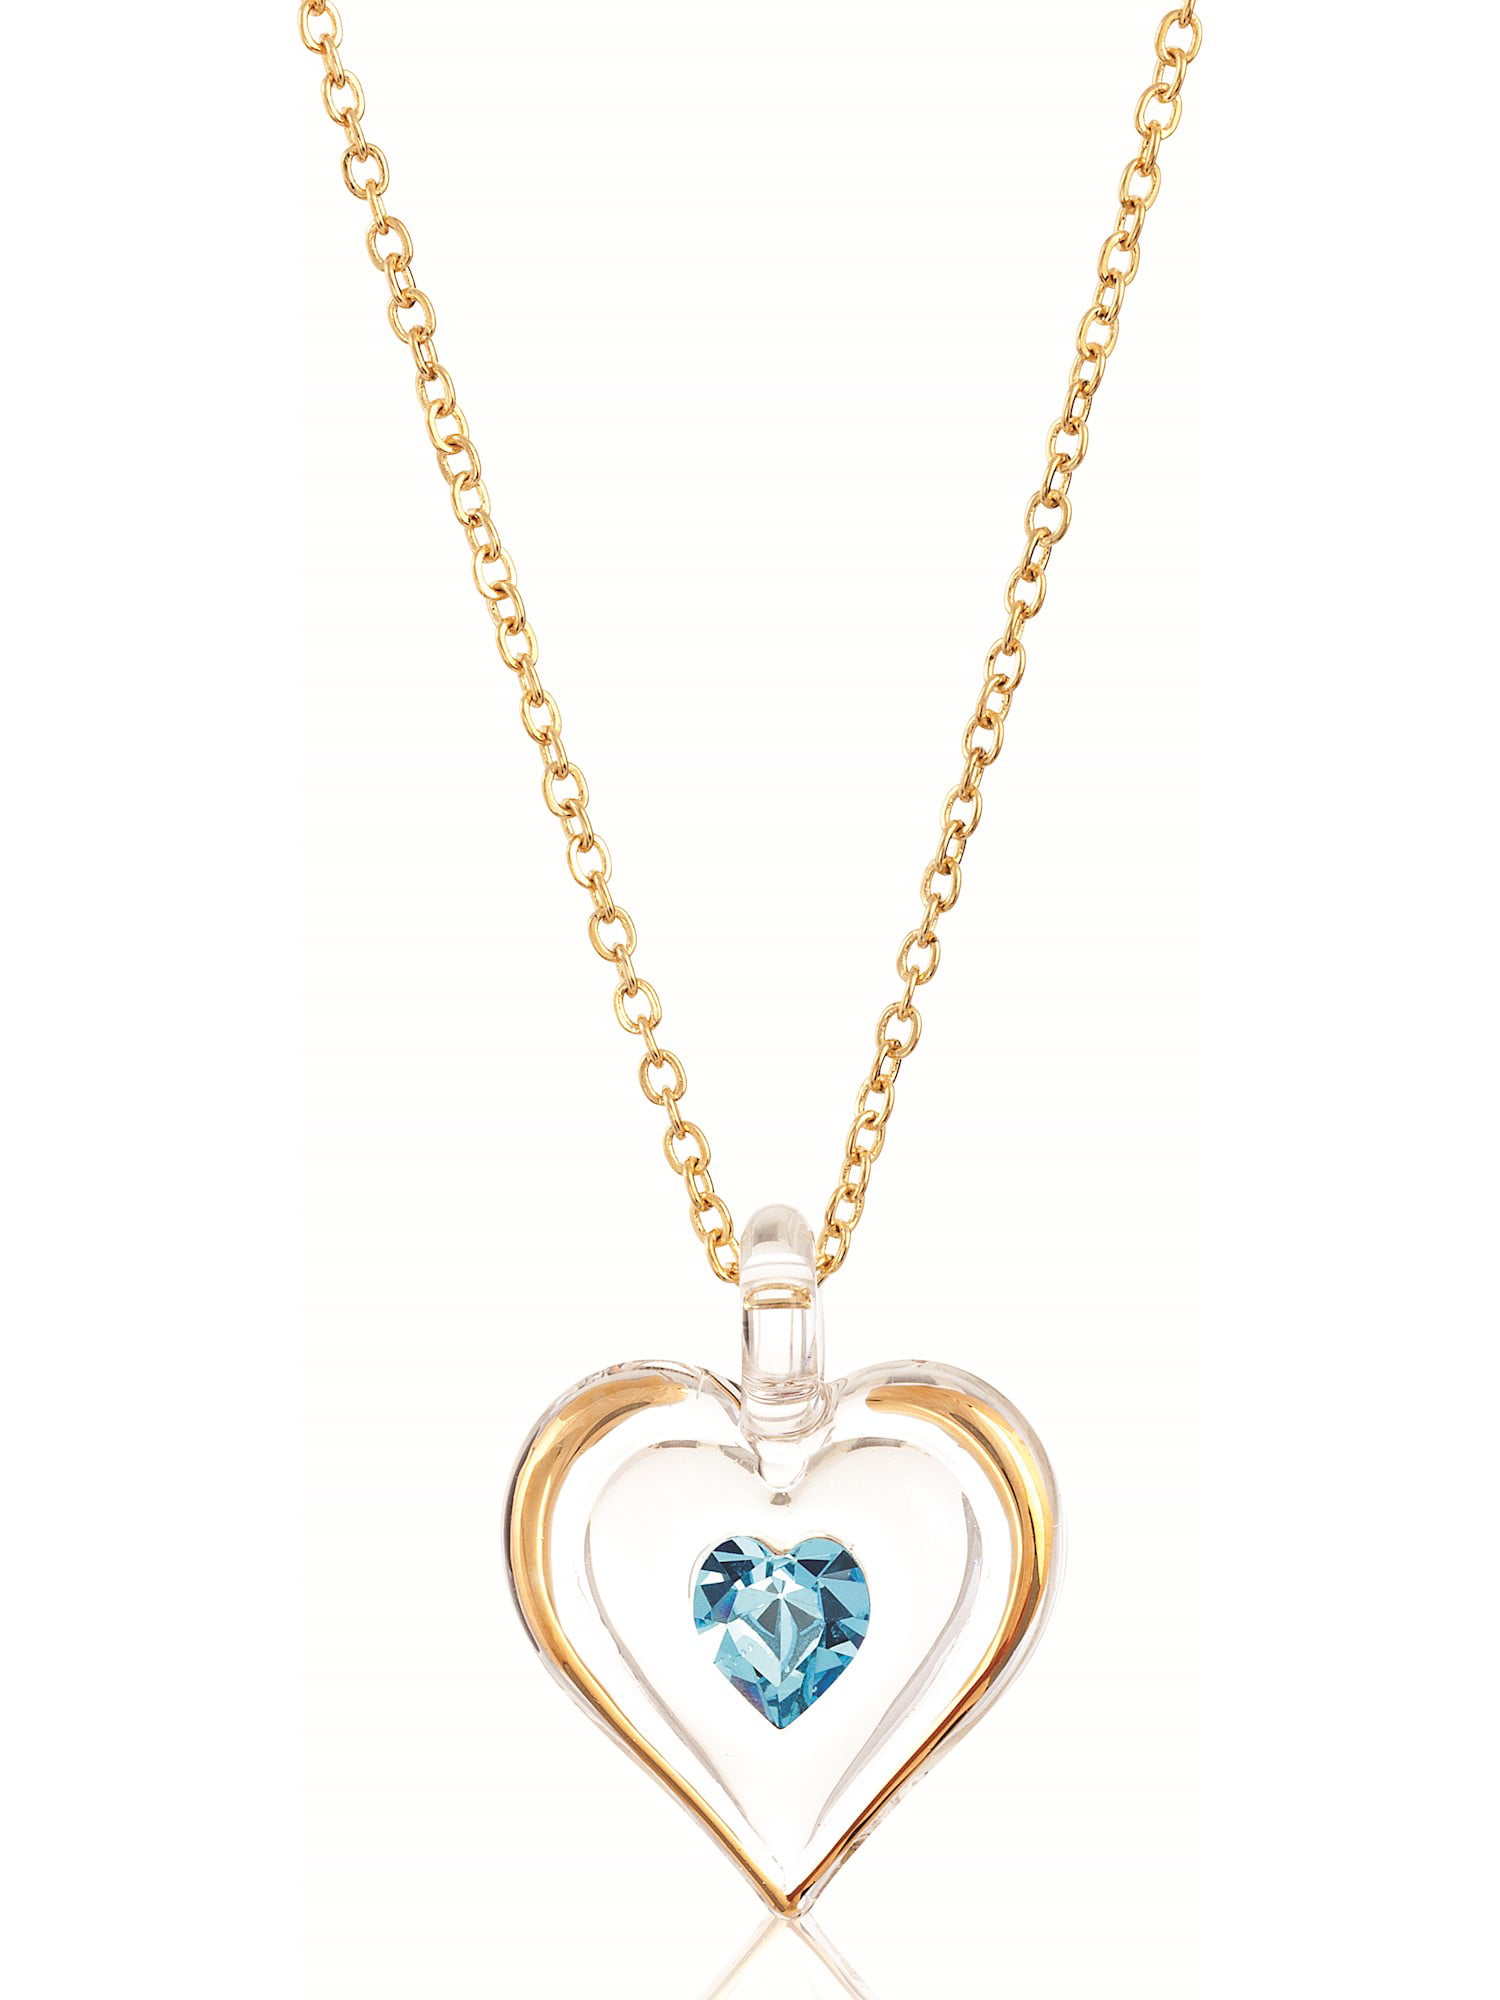 Birthstone Heart Personalized Necklace - 5 Stones